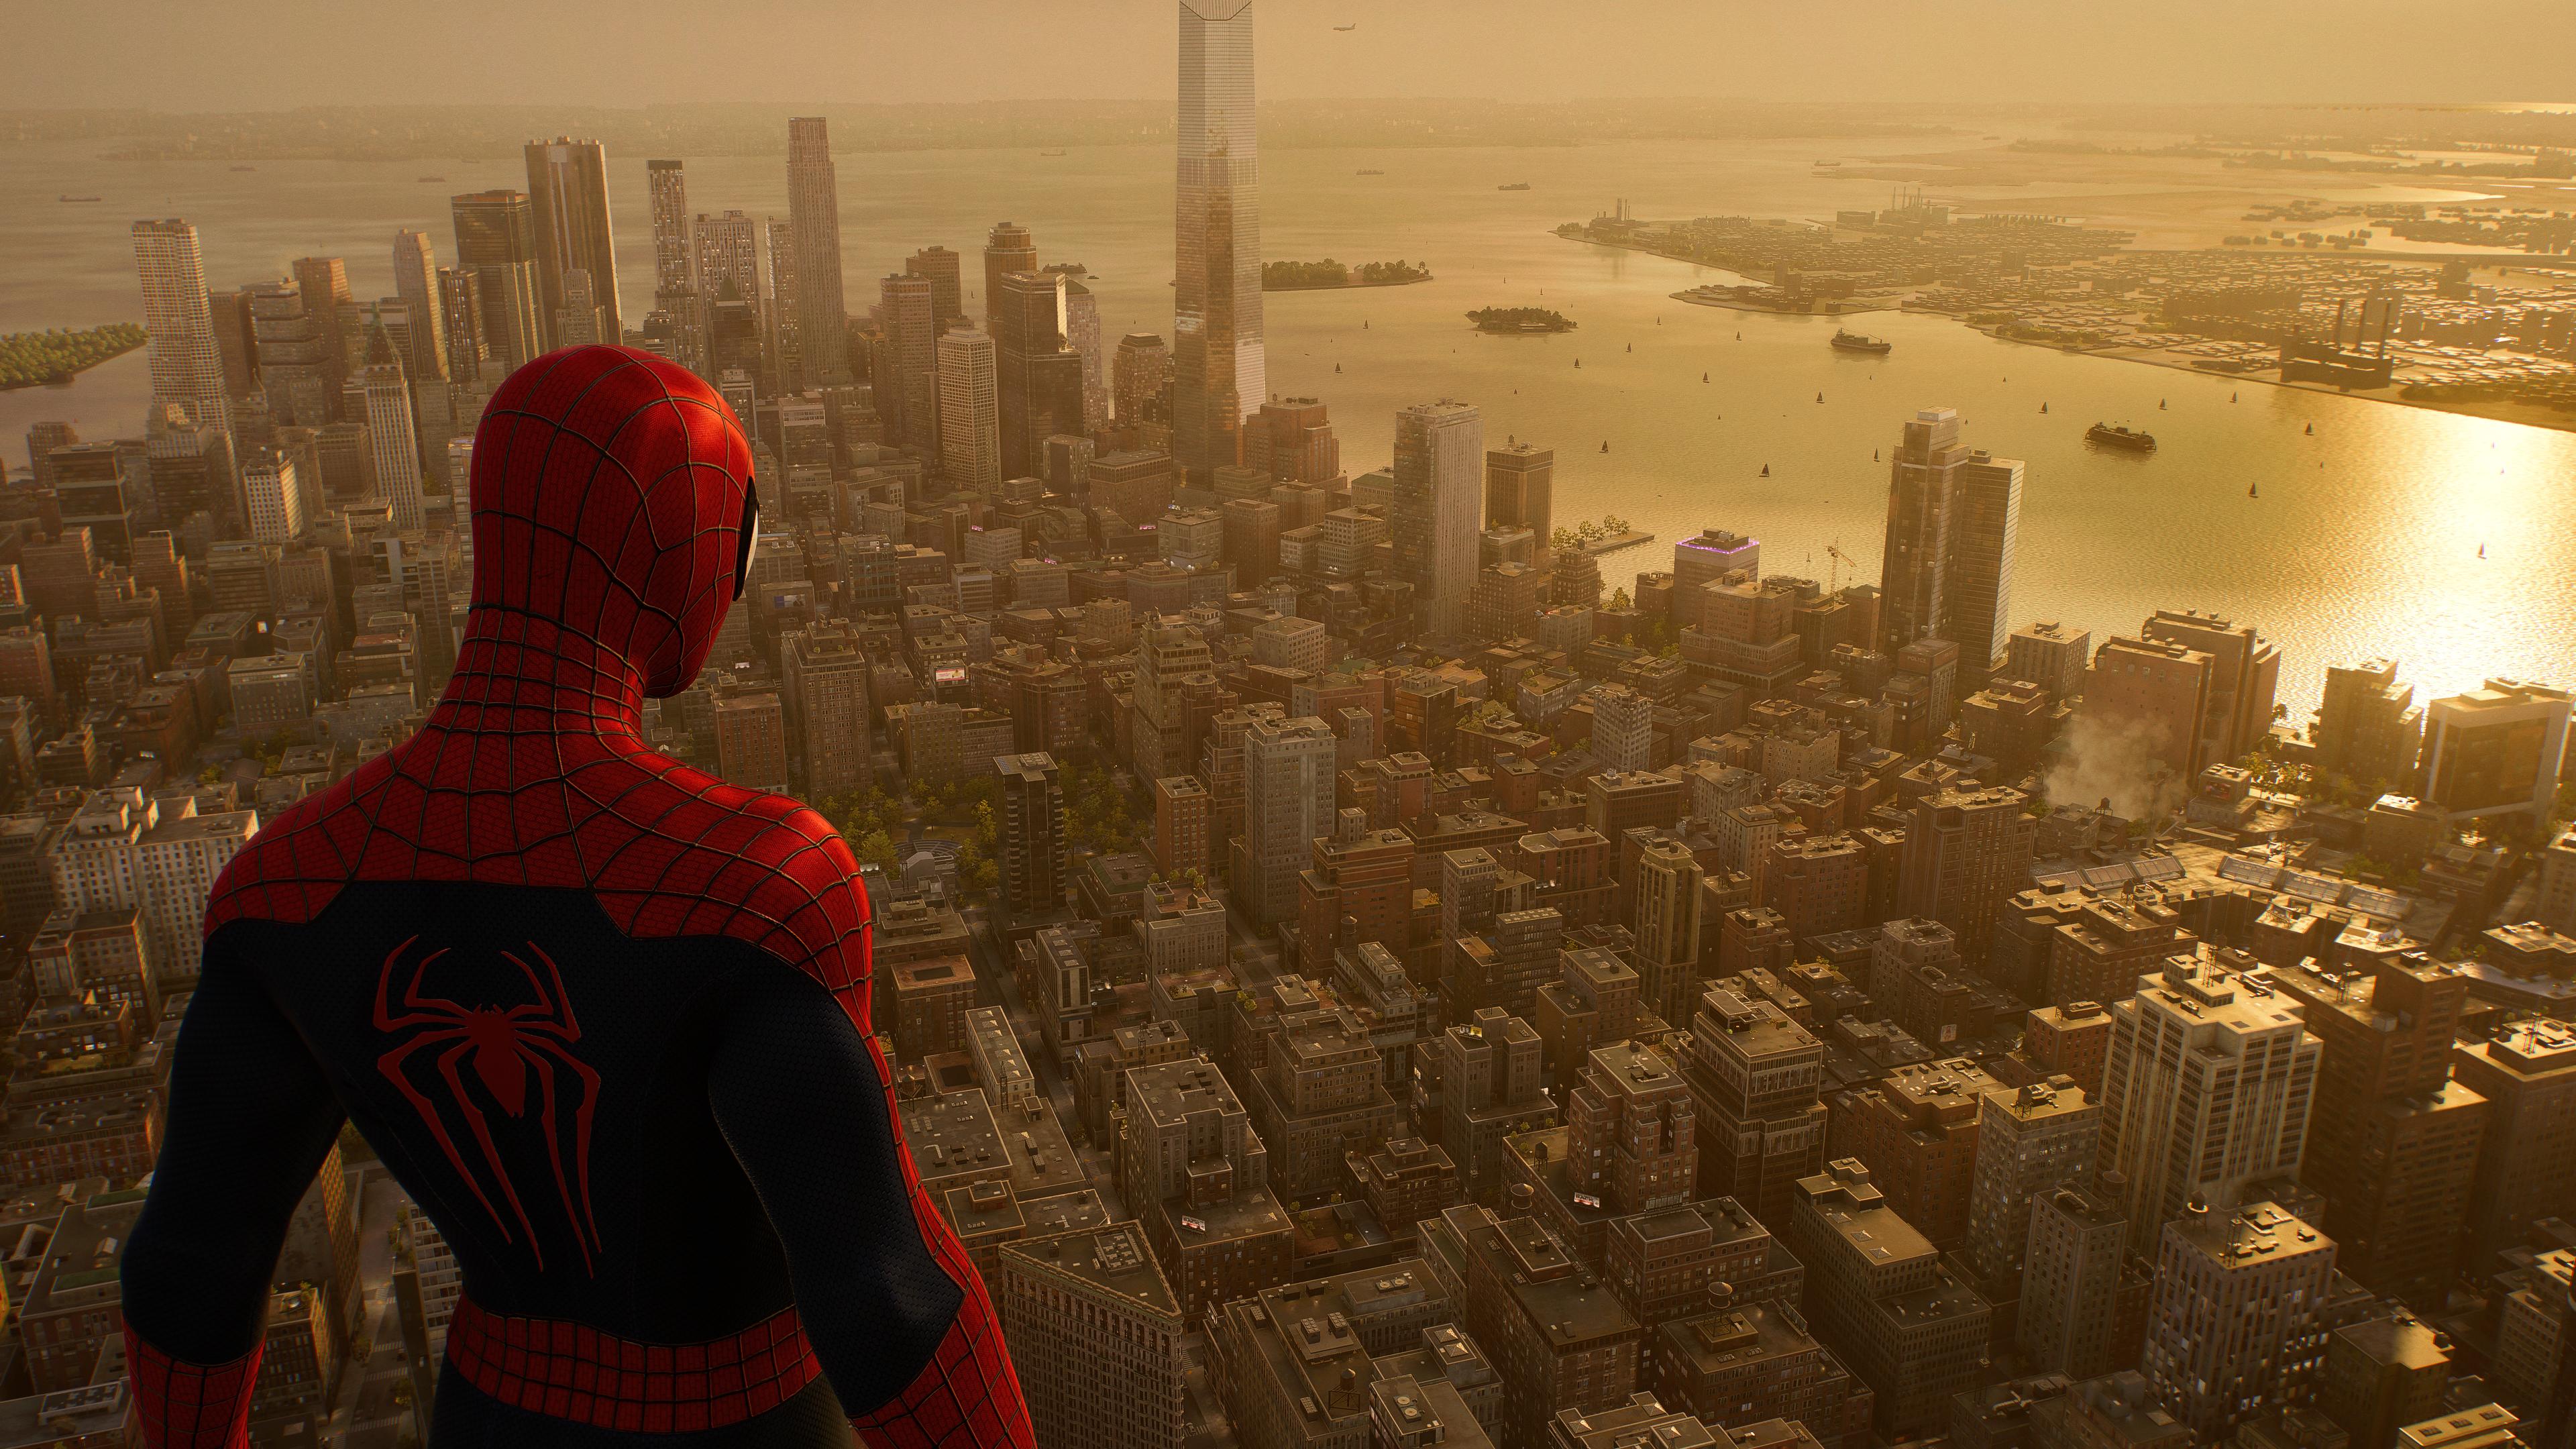 General 3840x2160 Playstation 5 Spider-Man 2 video games Peter Parker video game characters CGI video game art screen shot sunset sunset glow standing bodysuit water building city skyscraper sunlight cityscape superhero looking into the distance